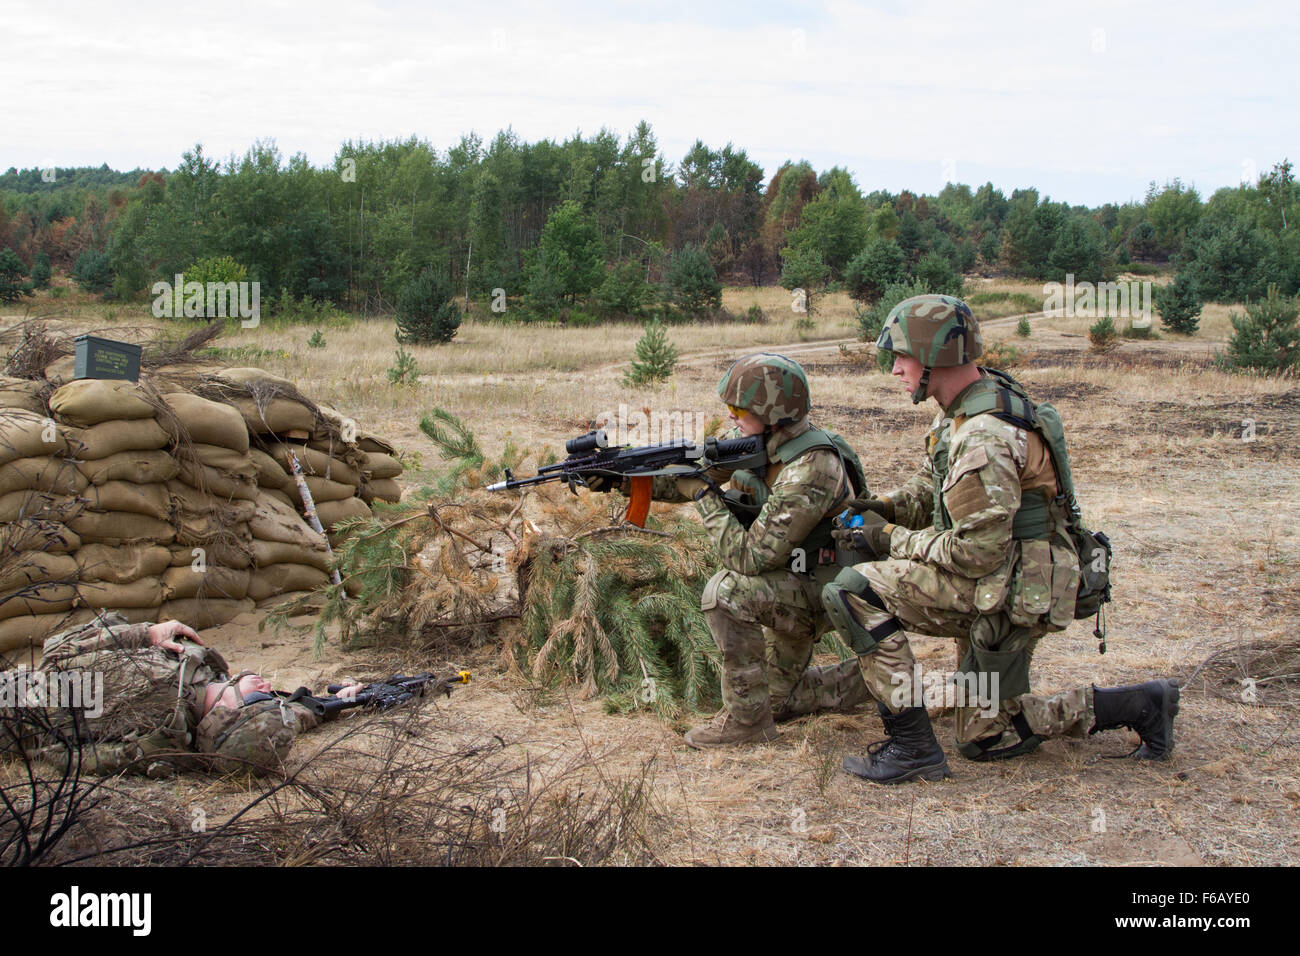 Soldiers with the Ukrainian national guard prepare to throw a grenade into a bunker during squad live-fire training Aug. 22, 2015, as part of Fearless Guardian in Yavoriv, Ukraine. The Soldiers practiced several different skills such as movement under contact, assaults, bunker clearing and first aid. Paratroopers with the U.S. Army's 173rd Airborne Brigade are in Ukraine for the second of several planned rotations to train Ukraine's newly-formed national guard as part of Fearless Guardian, which is scheduled to last through November. (U.S. Army photo by Sgt. Alexander Skripnichuk, 13th Public  Stock Photo